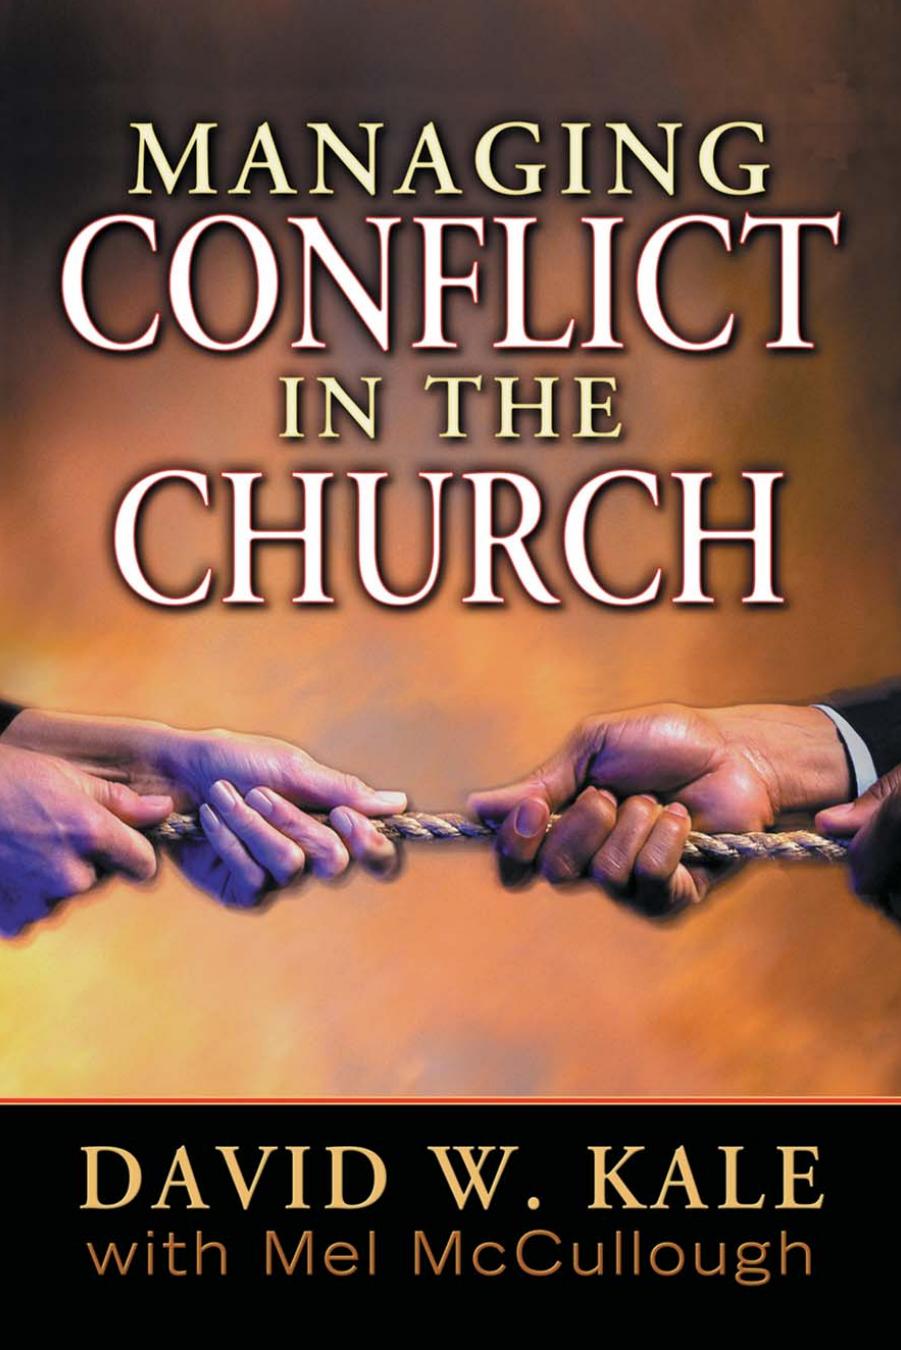 Managing Conflict in the Church by David W. Kale; Mel McCullough